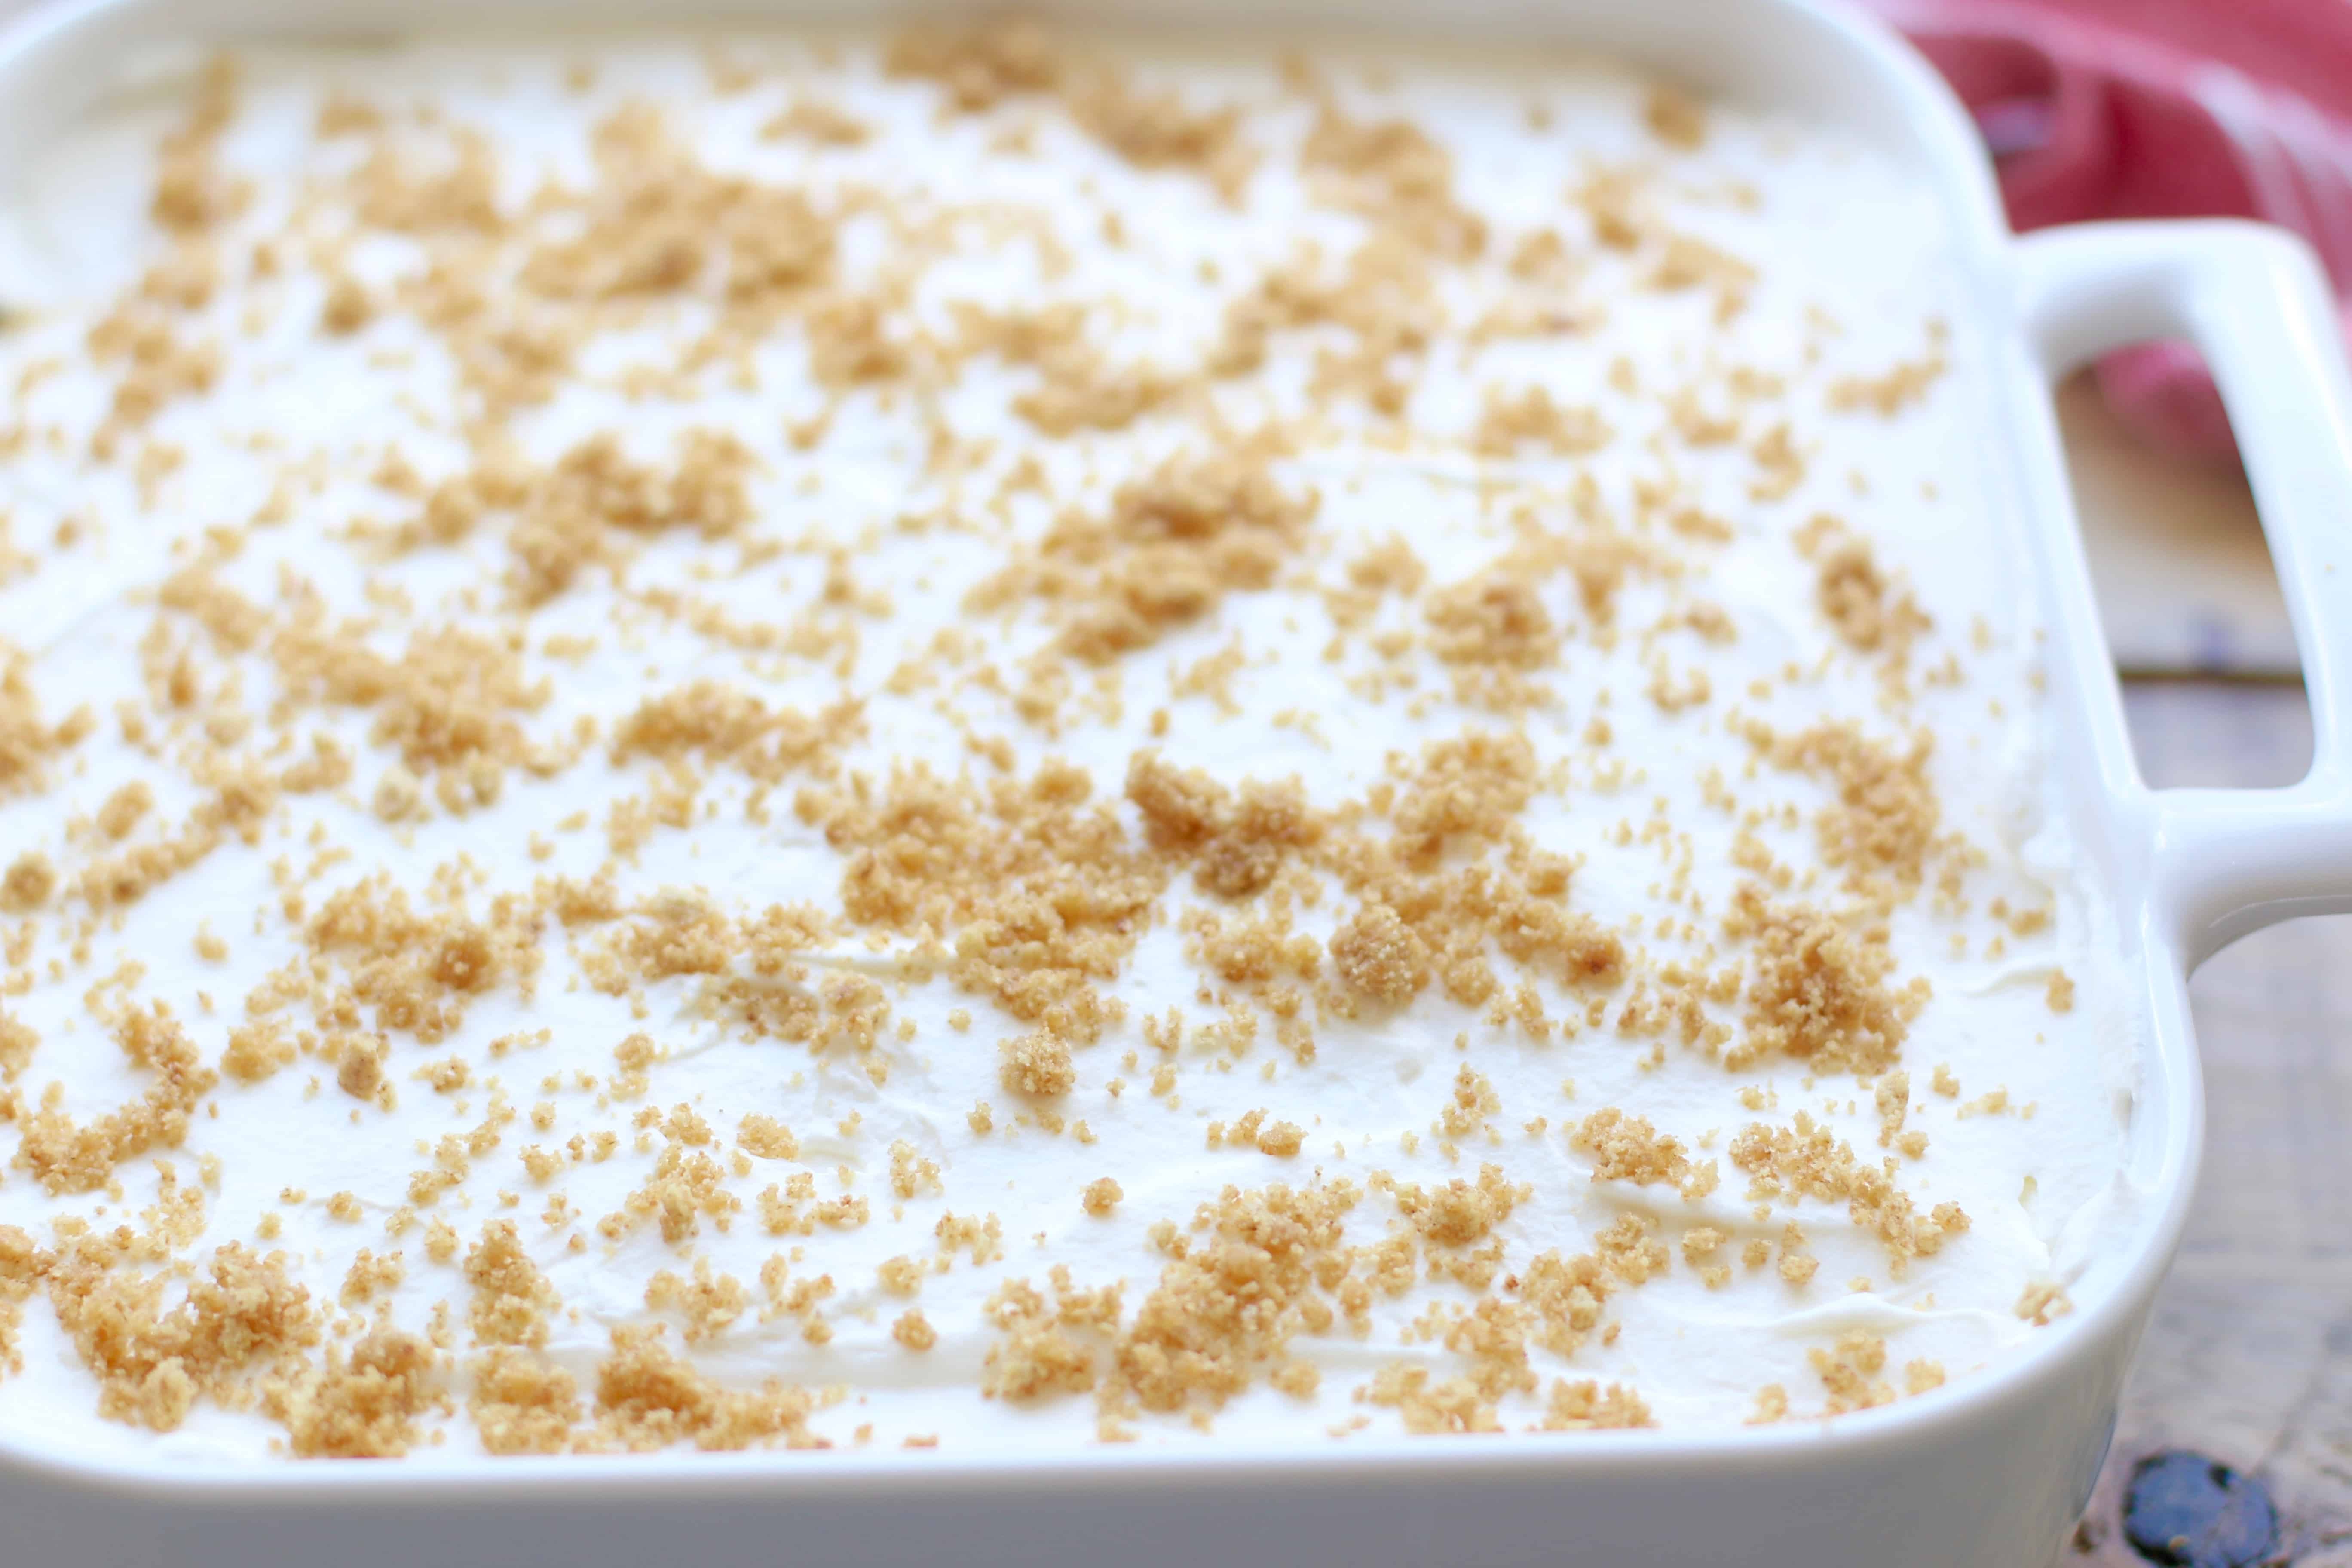 graham cracker crumbs spread on top of finished no bake apple yum yum dessert.